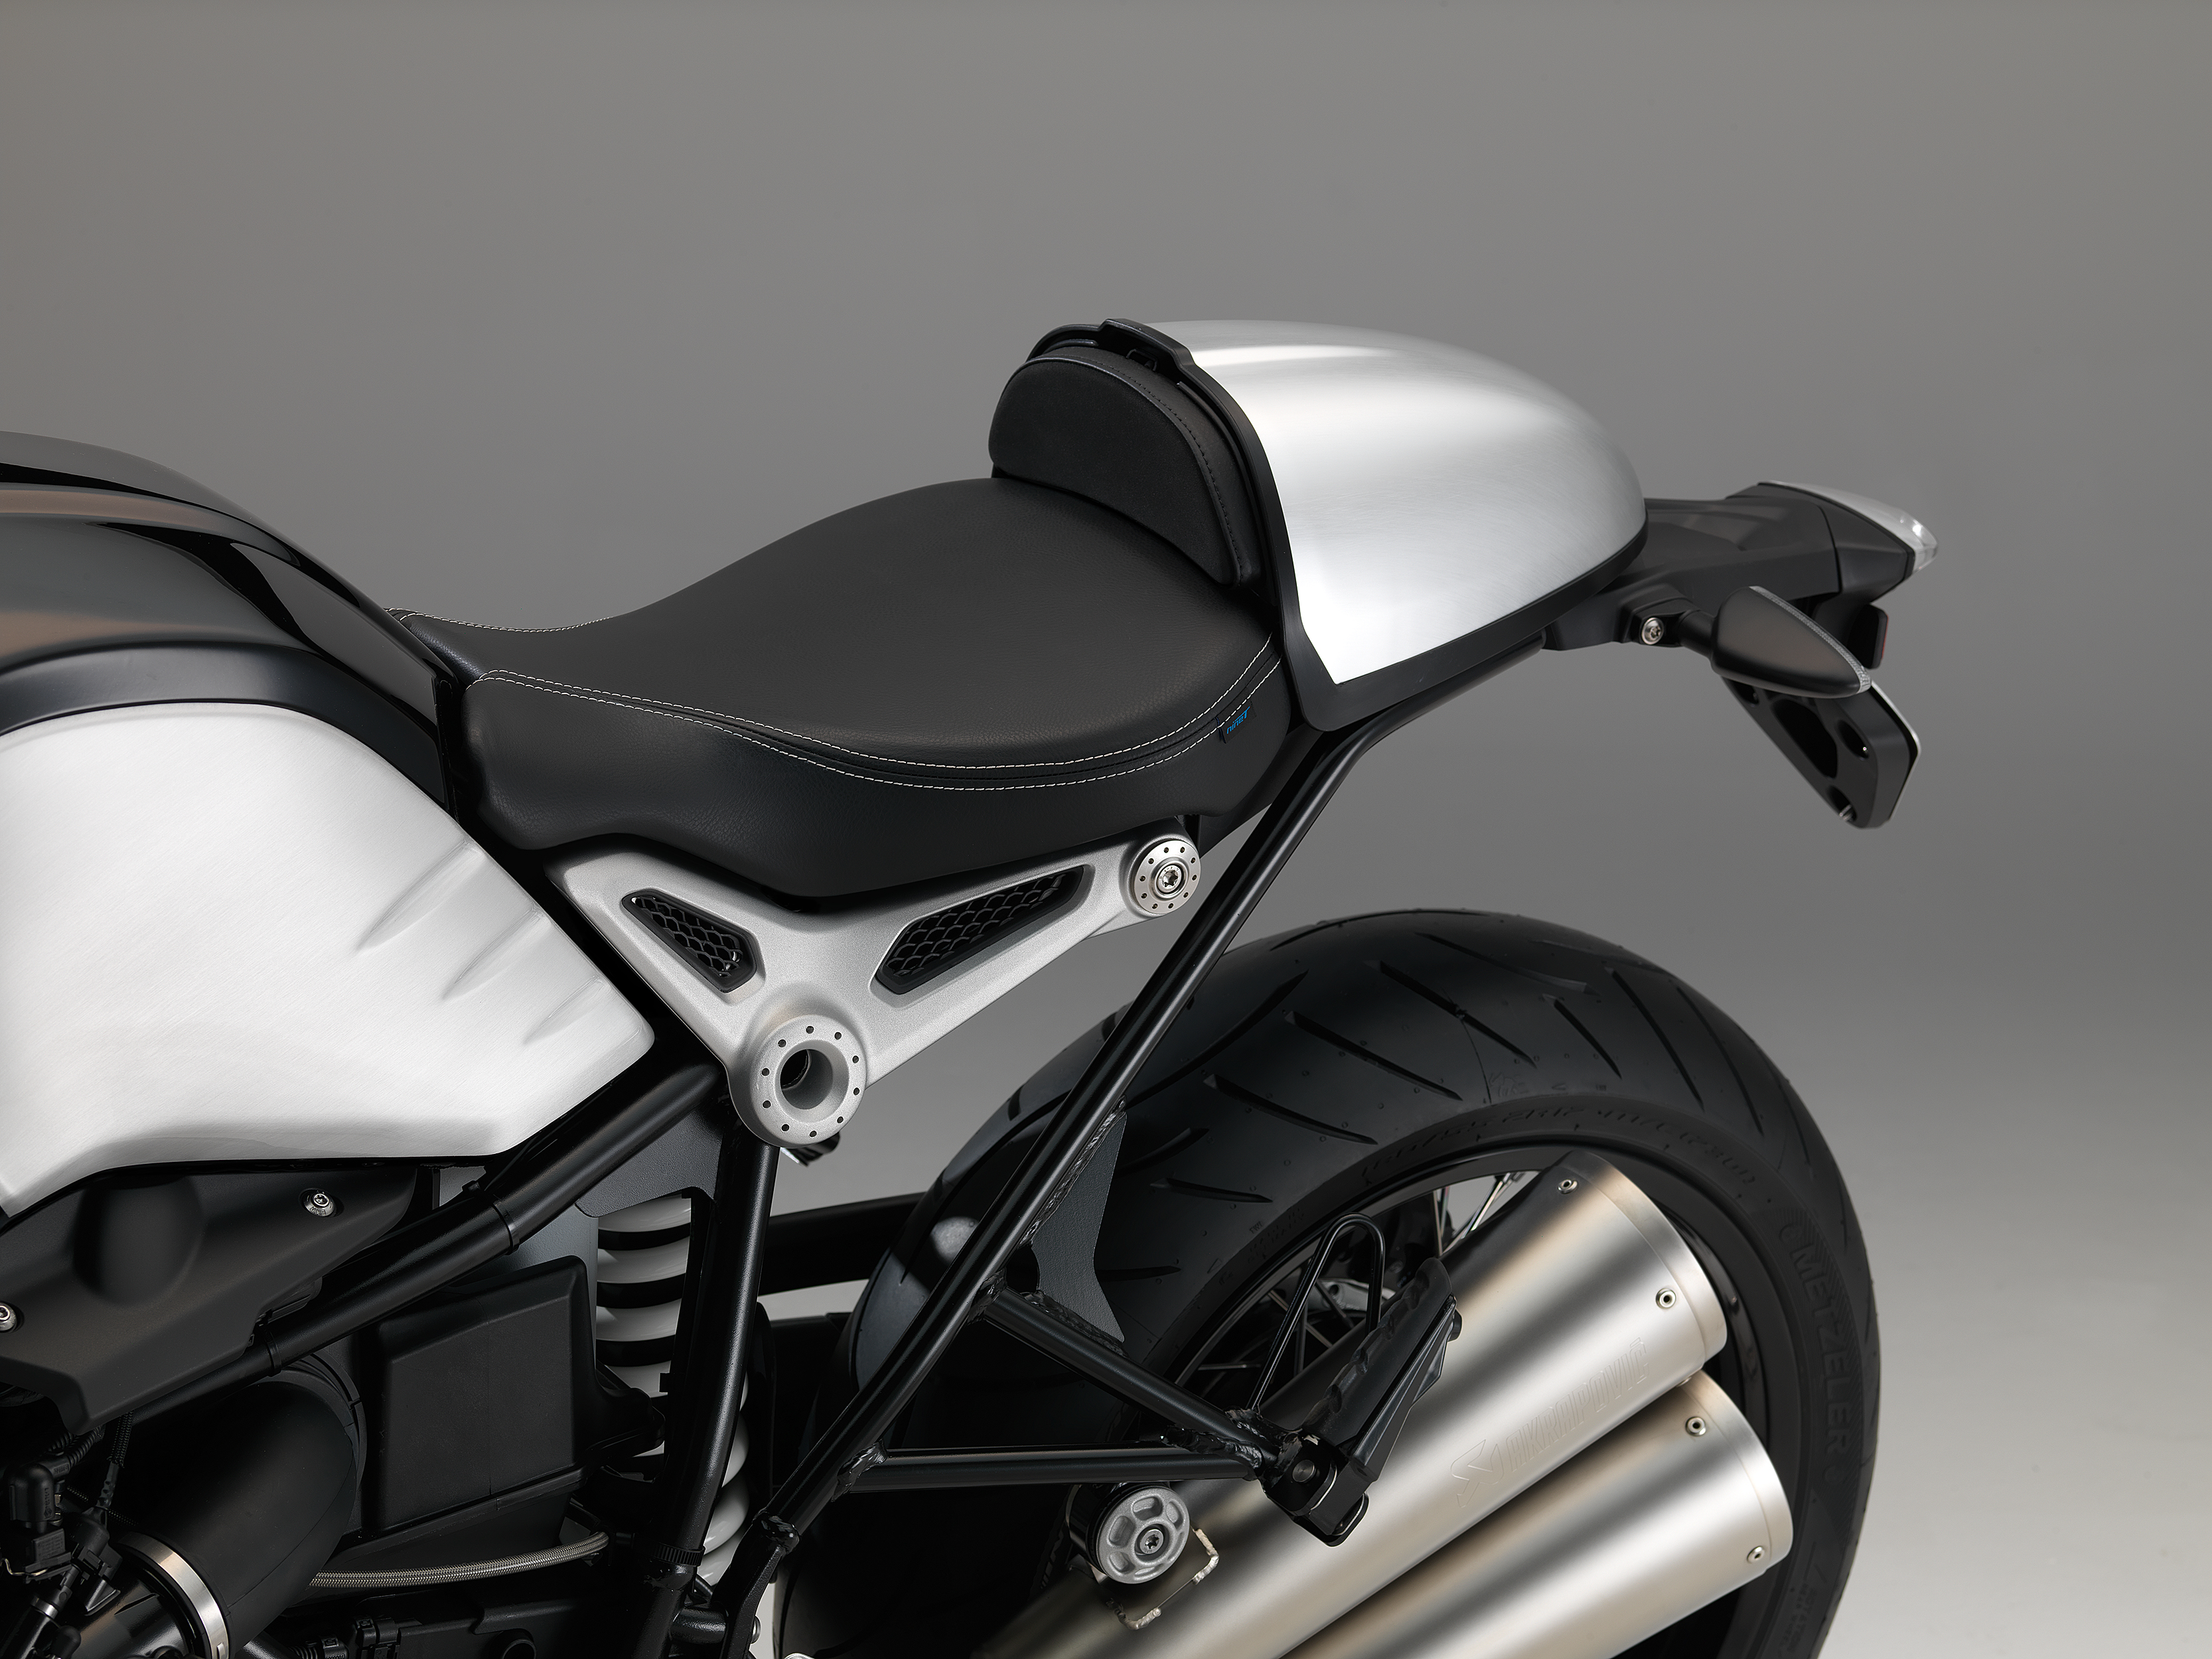 BMW NineT specs and pictures